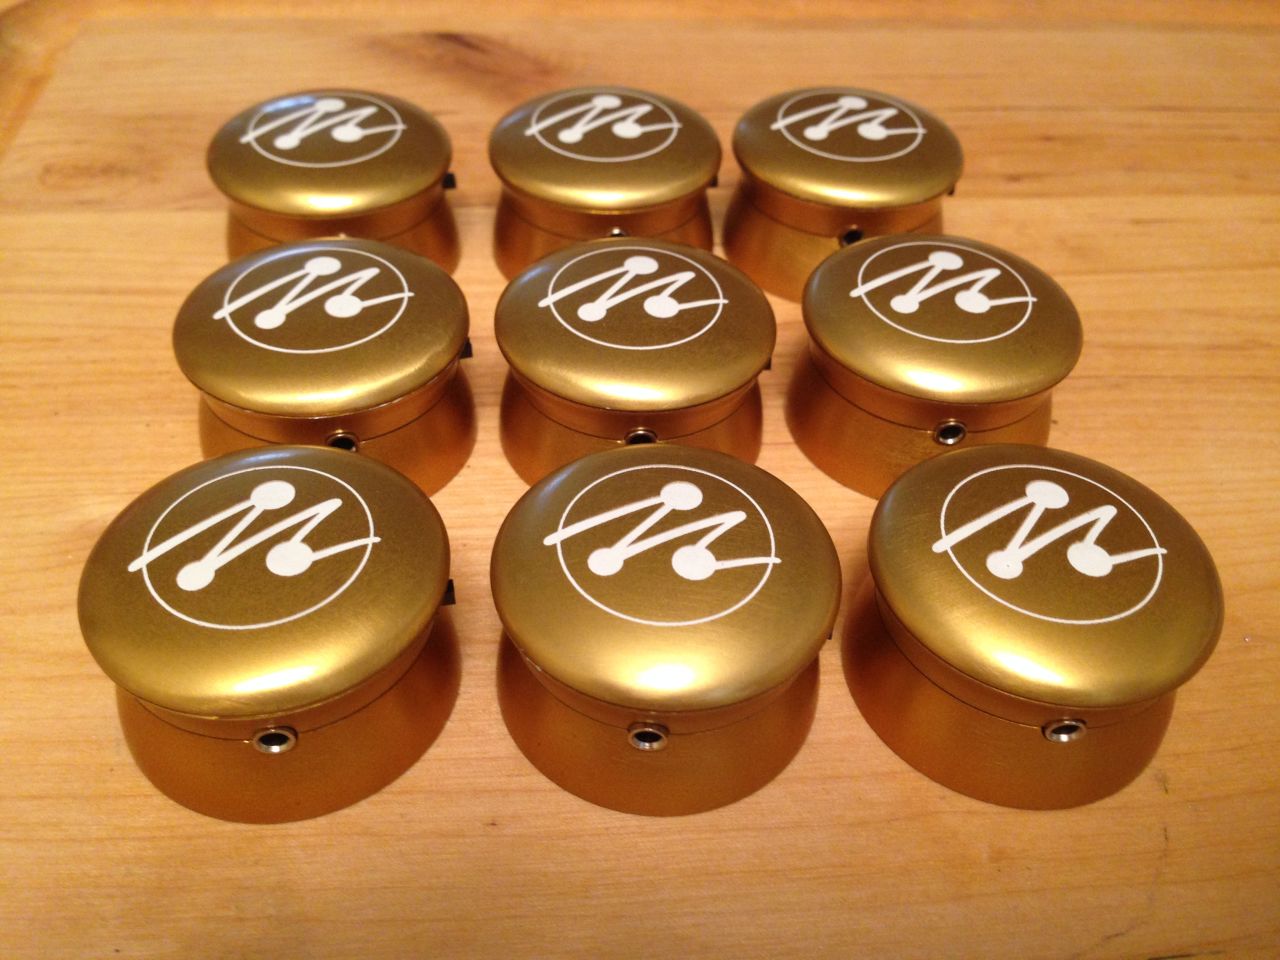 The first batch of Mogees units has already been delivered to Kickstarter backers.